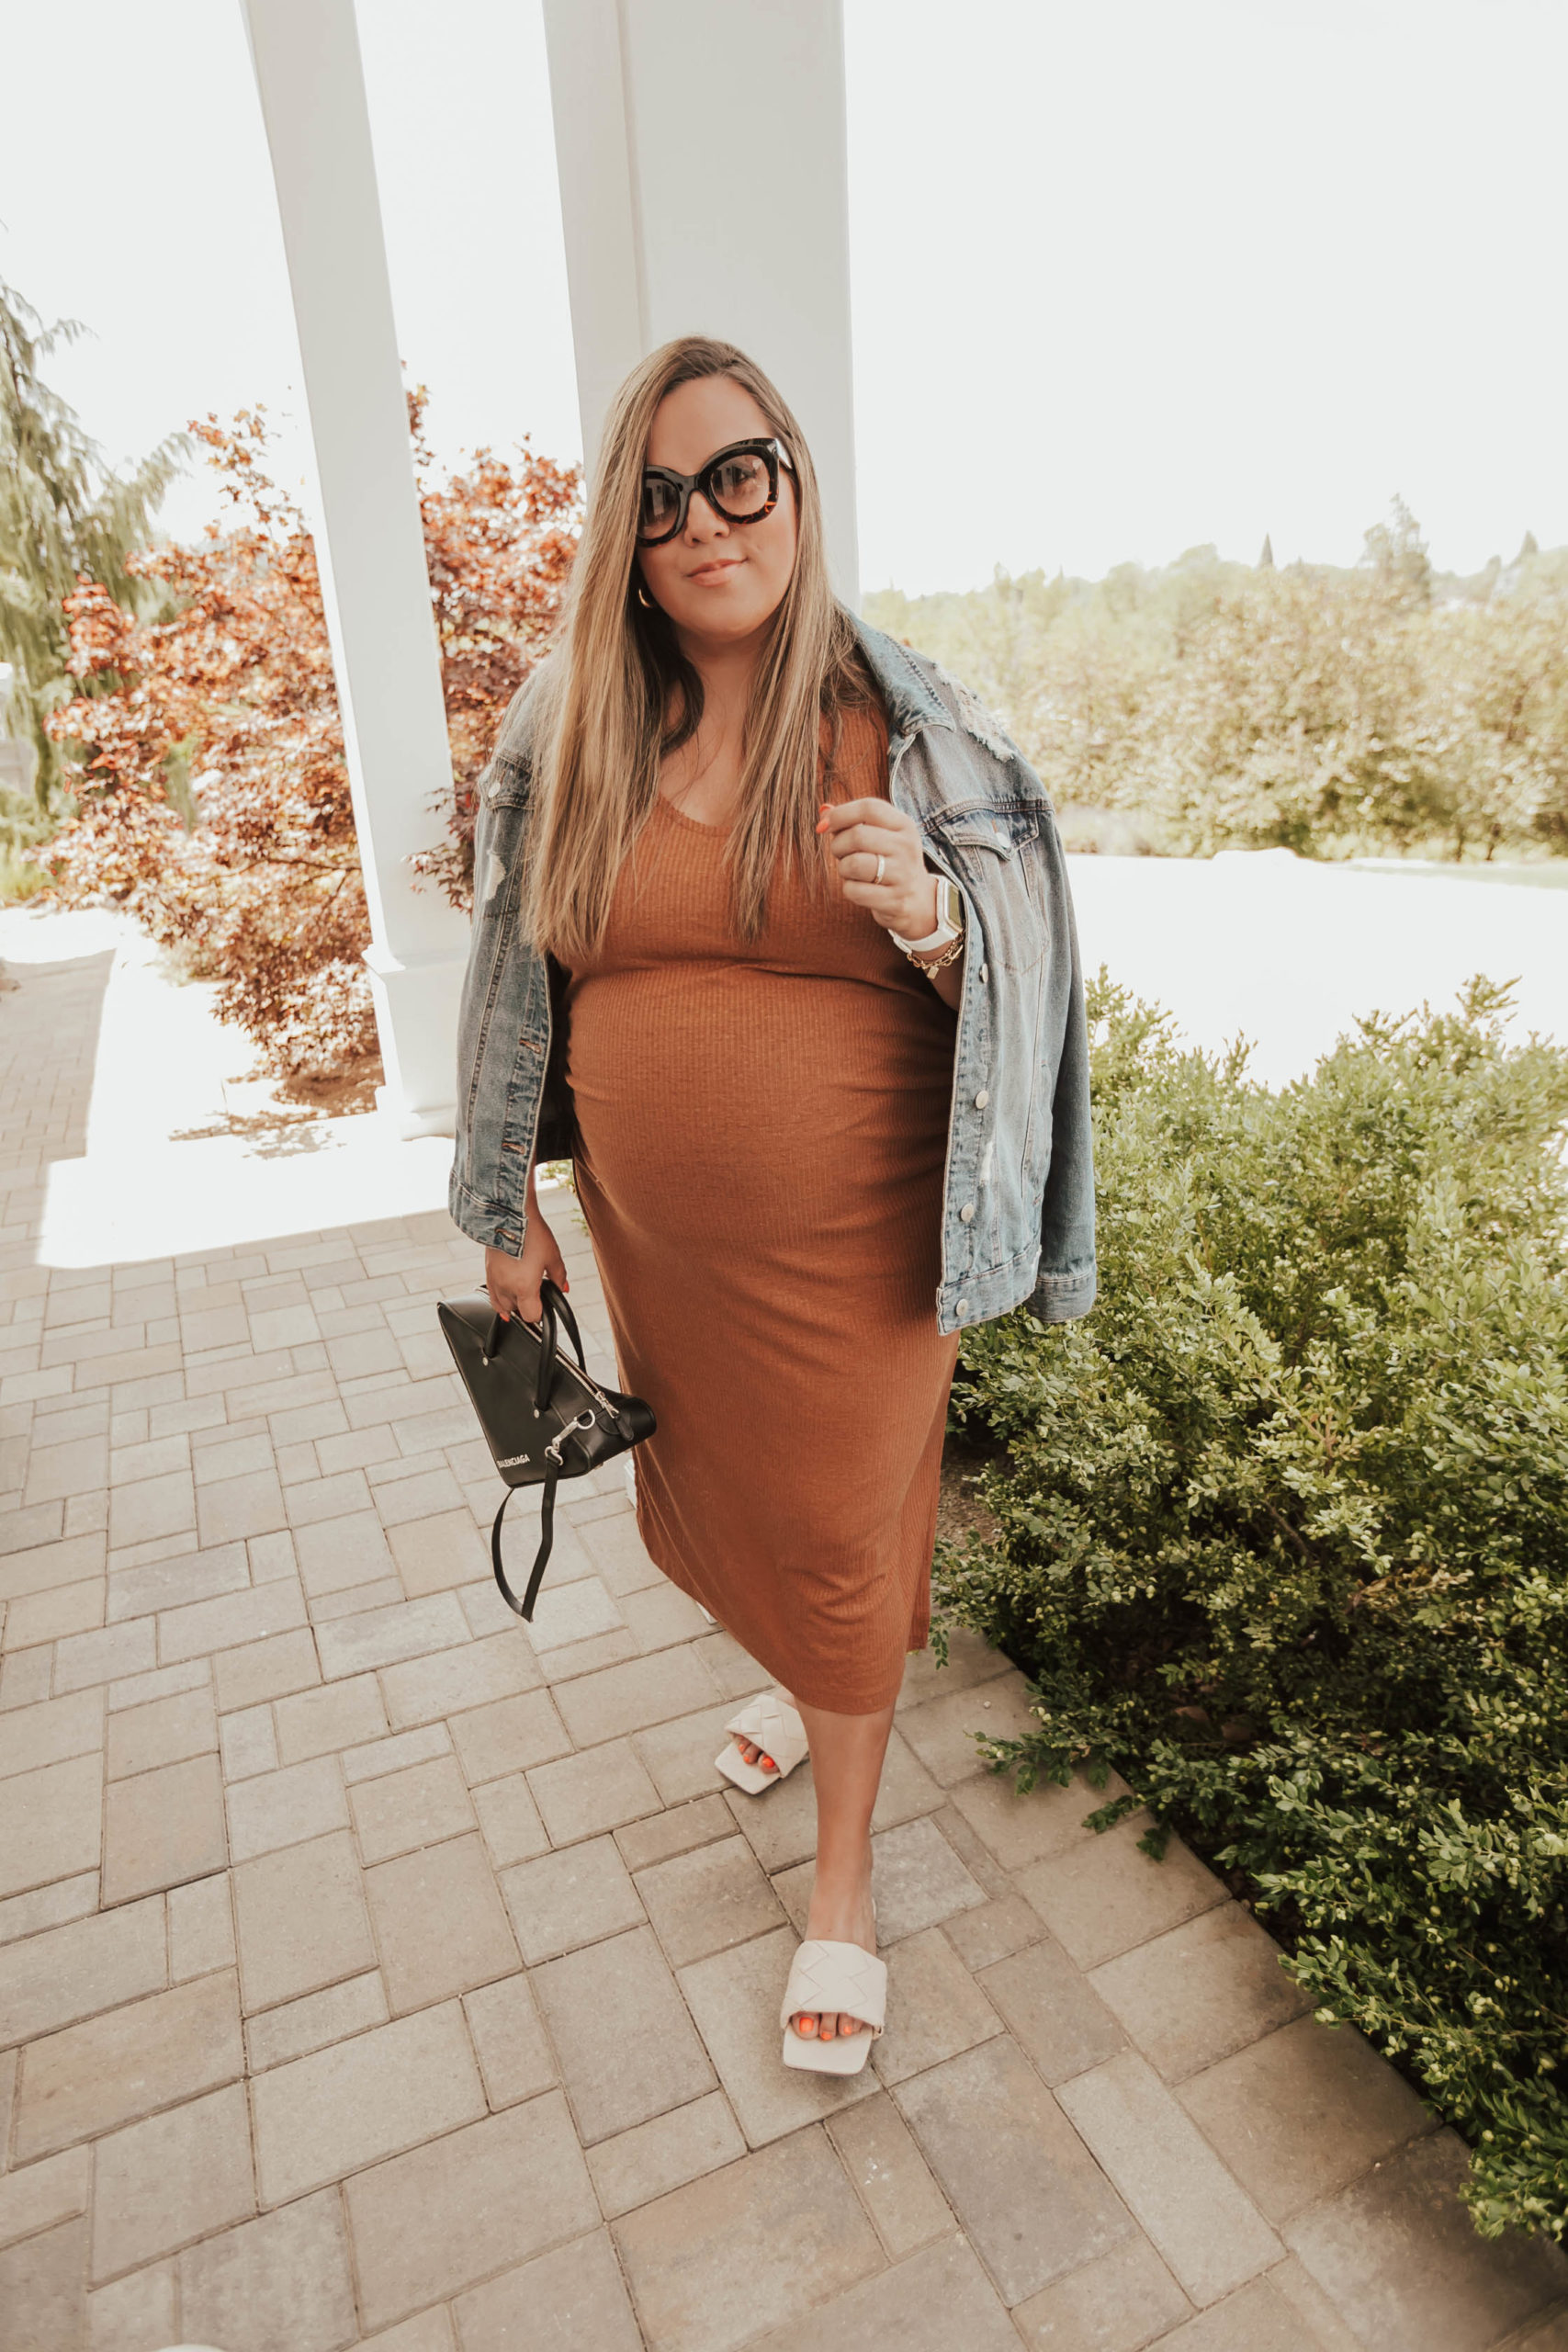 Reno blogger, Ashley Zeal Hurd, from The Ashley and Emily blog shares her favorite pairs of Amazon Sunglasses. 